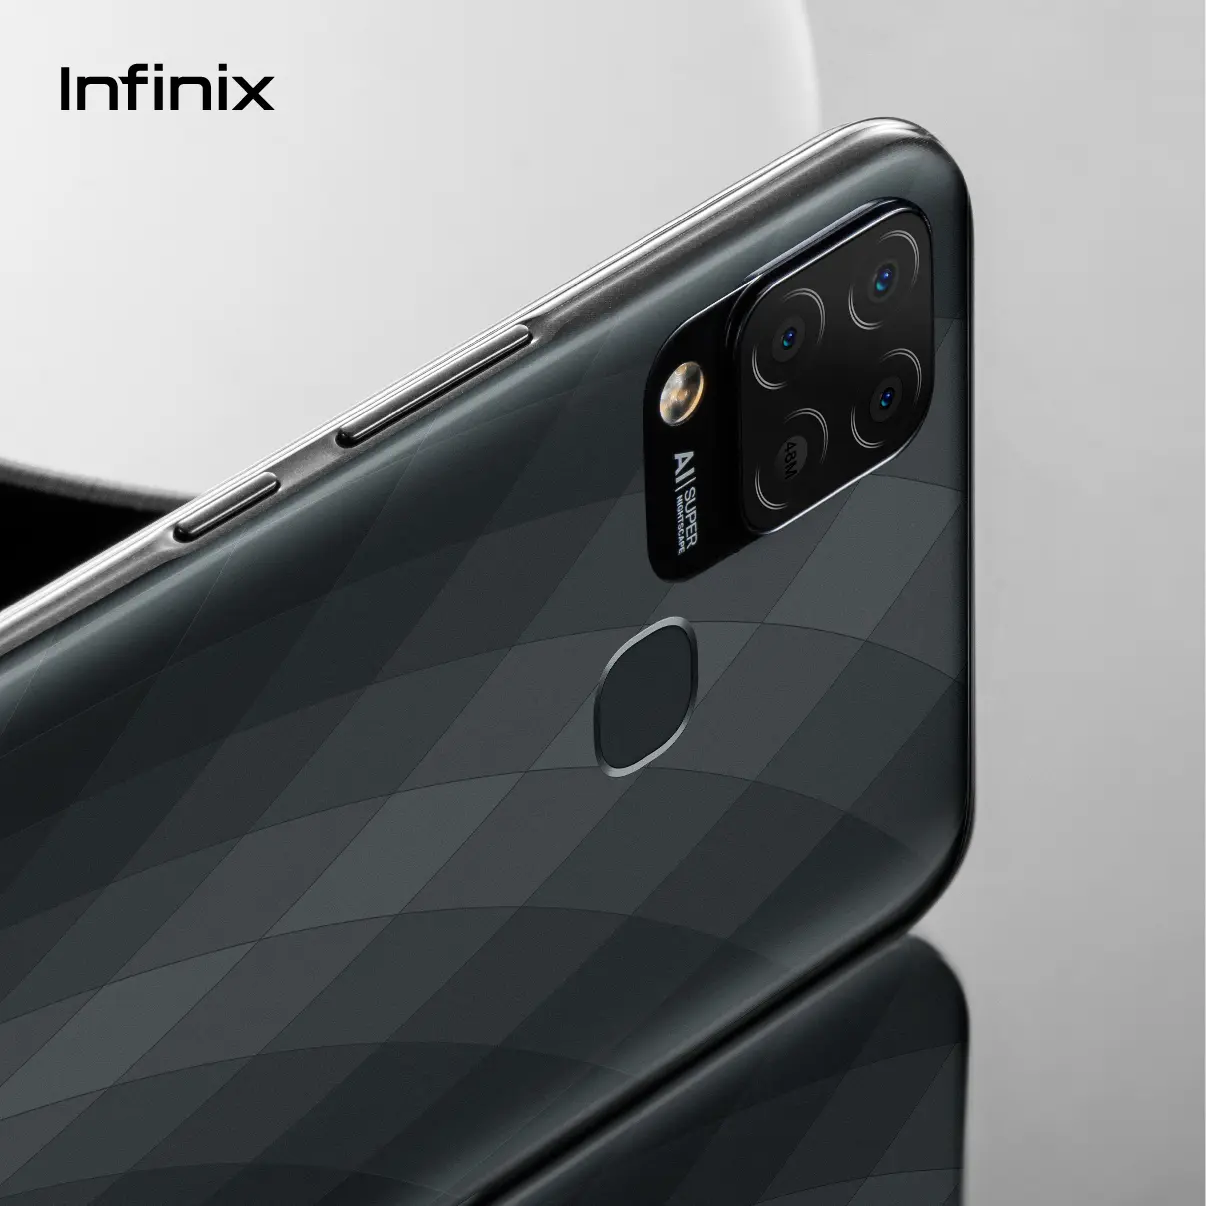 Pro or novice? Find out which level you're at as a mobile phone user! Infinix hot 10s